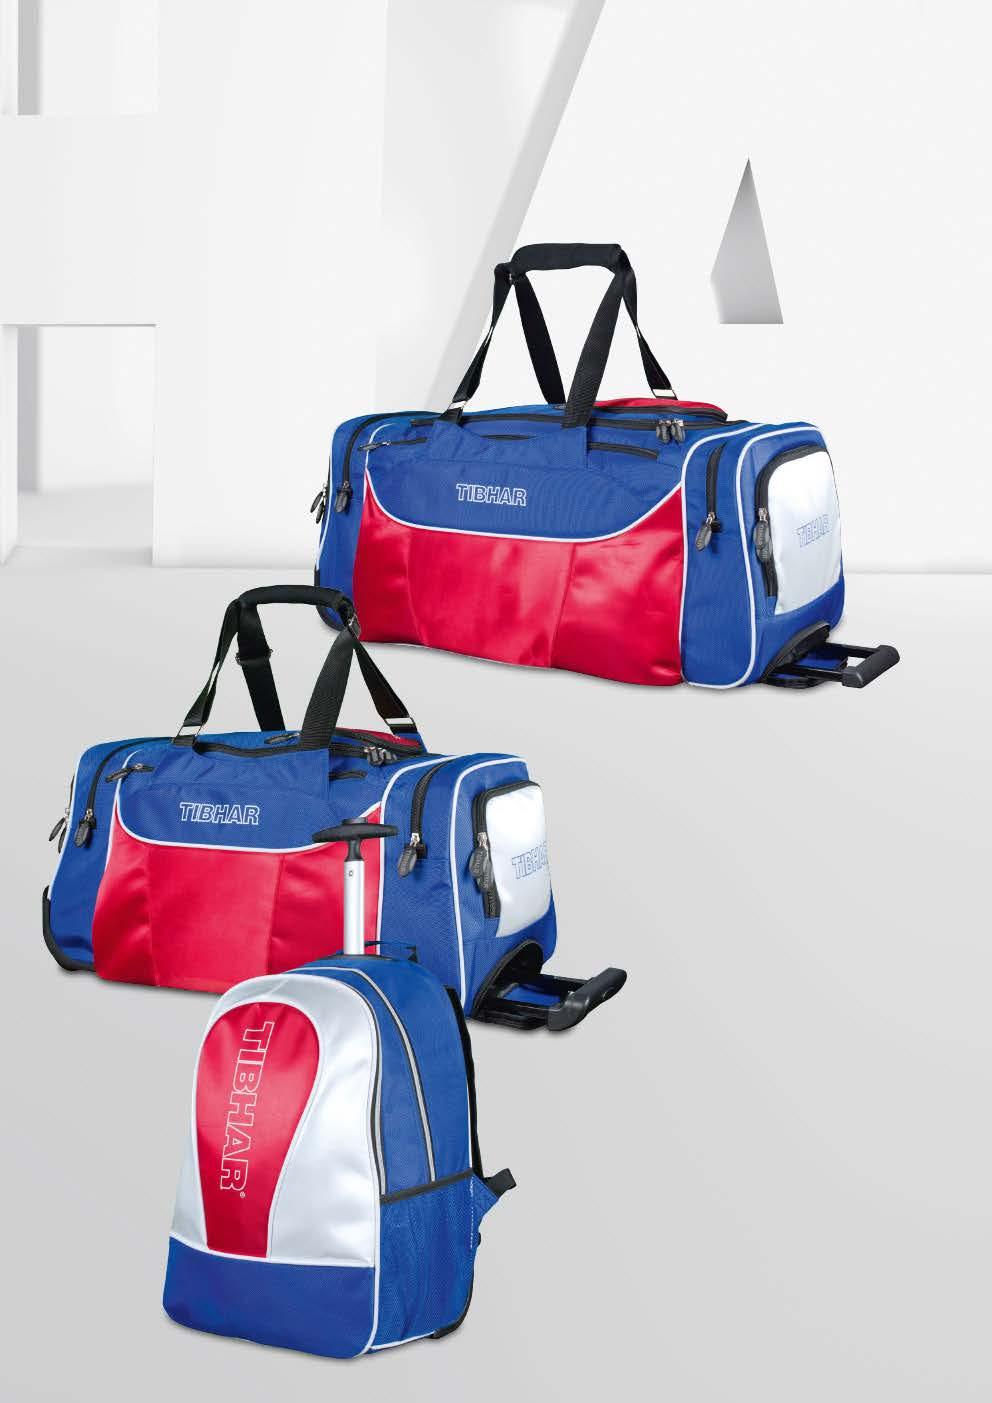 ROLLERBAG TREND BIG Practical sports bag on wheels with telescopic grip Spacious main compartment and many additional pockets Robust two-way zippers Maße: 78 x 36 x 34 cm blue/white/red ROLLERBAG